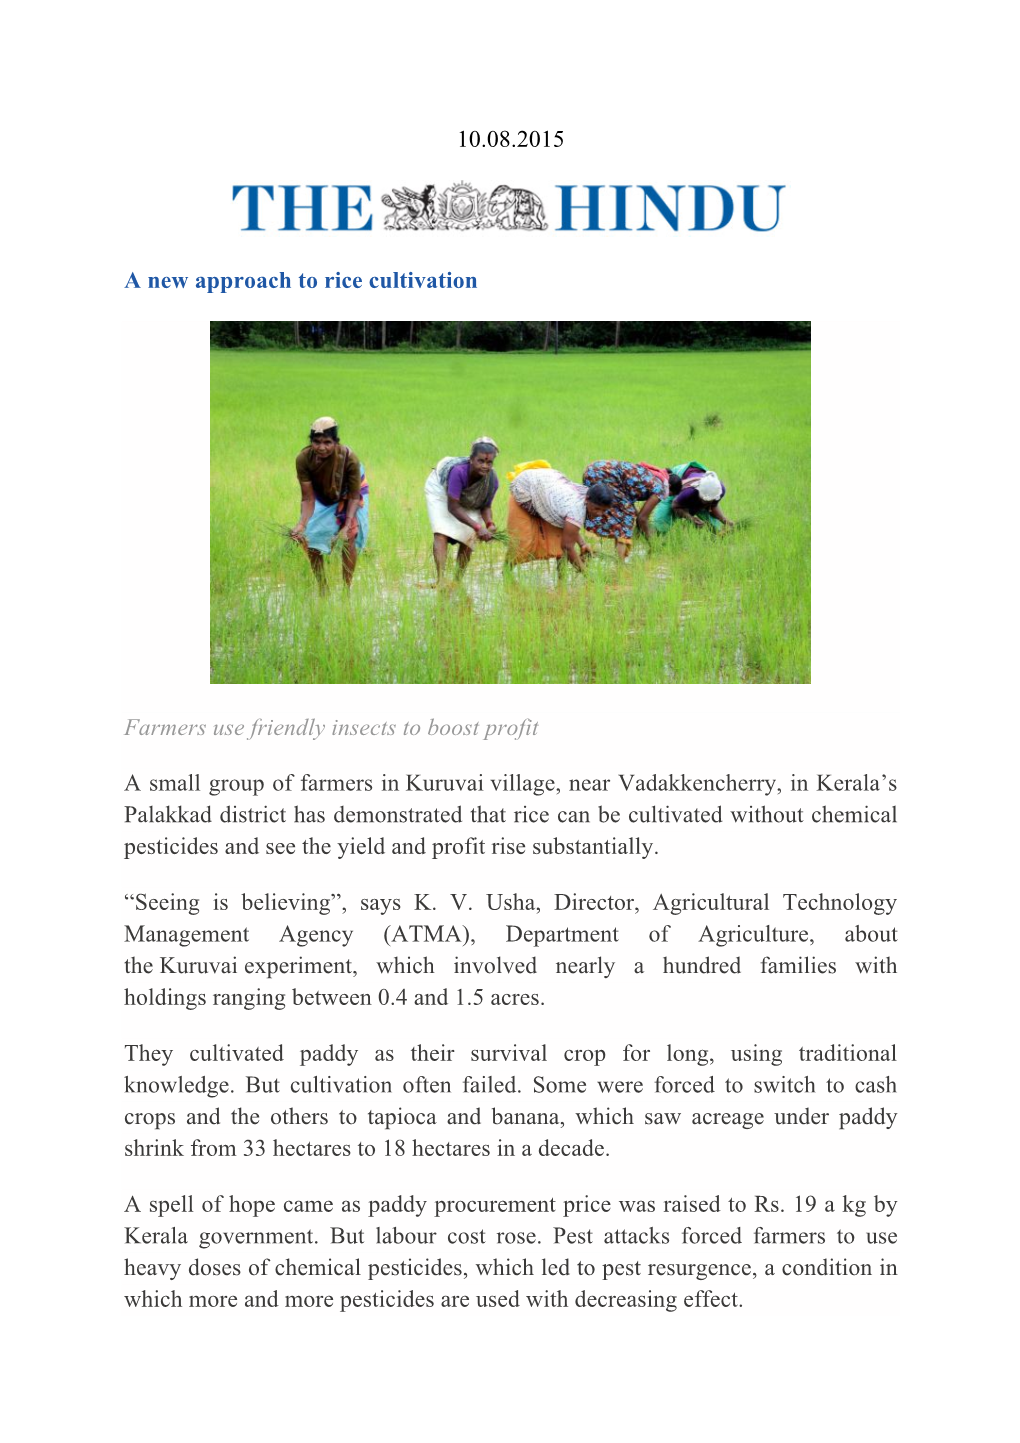 10.08.2015 a New Approach to Rice Cultivation Farmers Use Friendly